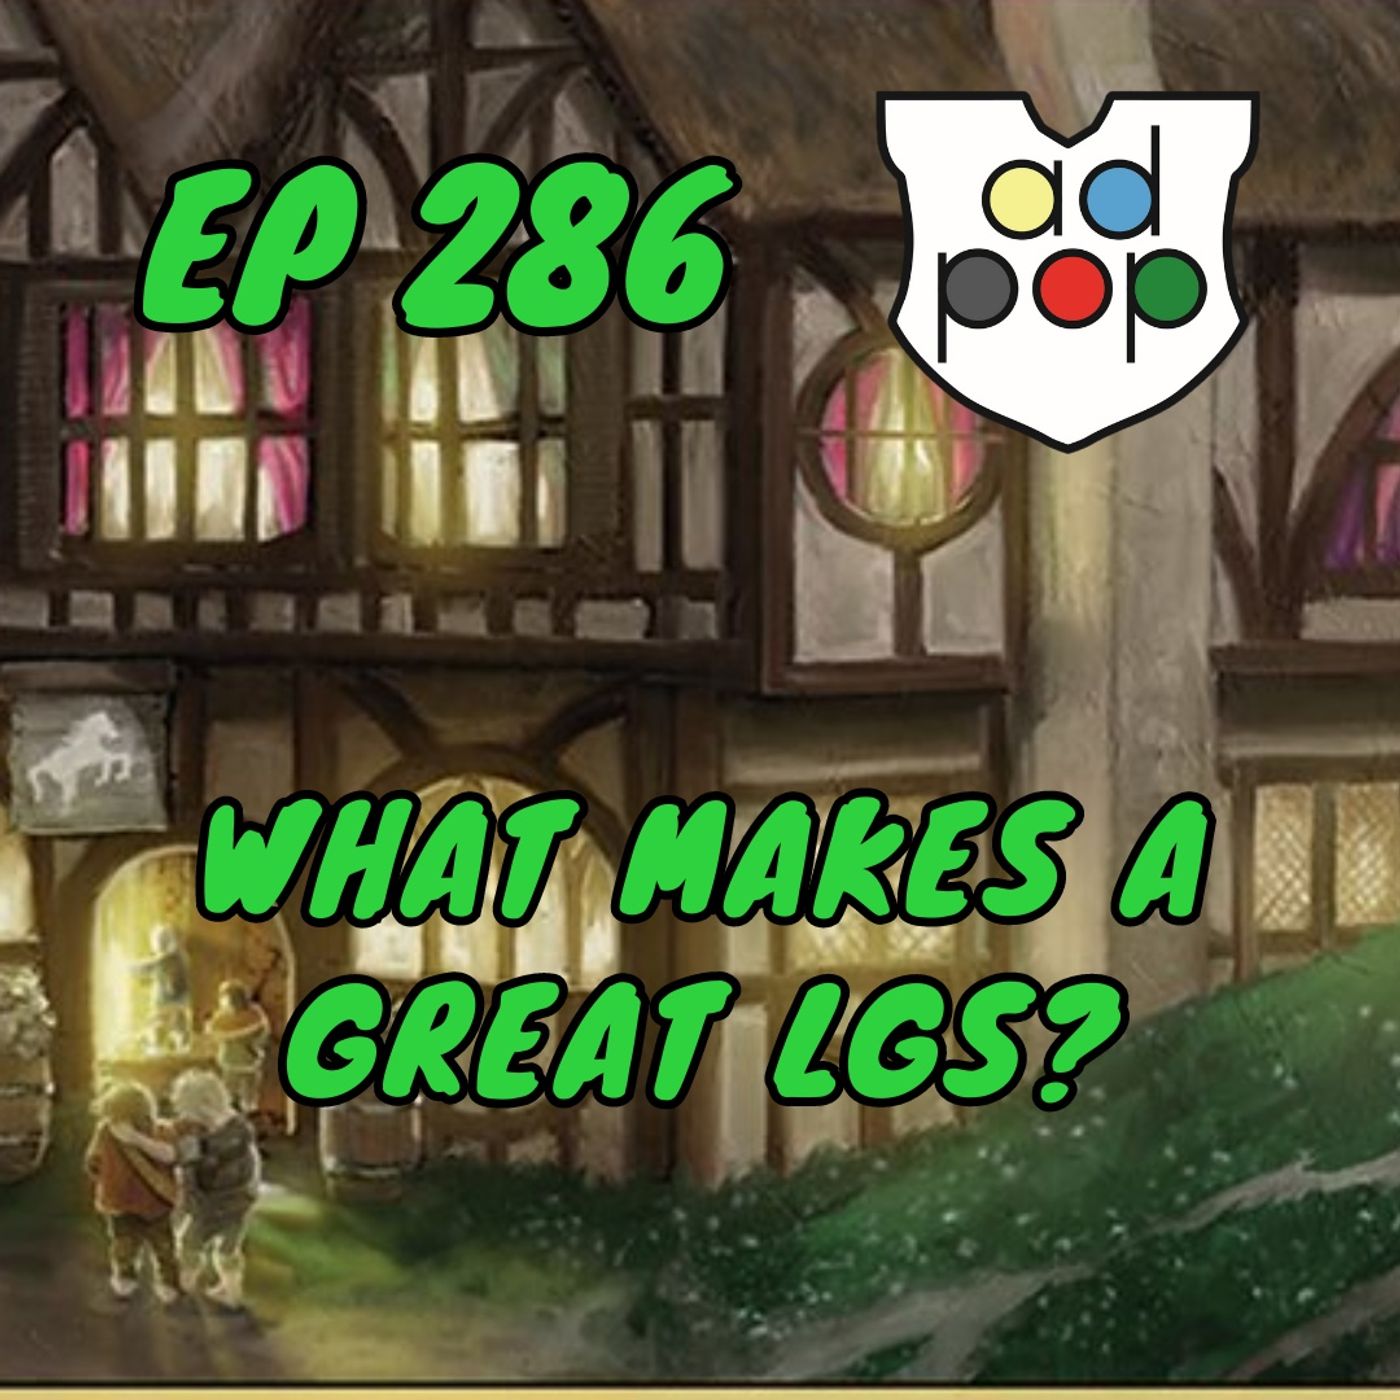 Commander ad Populum, Ep 286 - What Makes a Great Local Game Store?